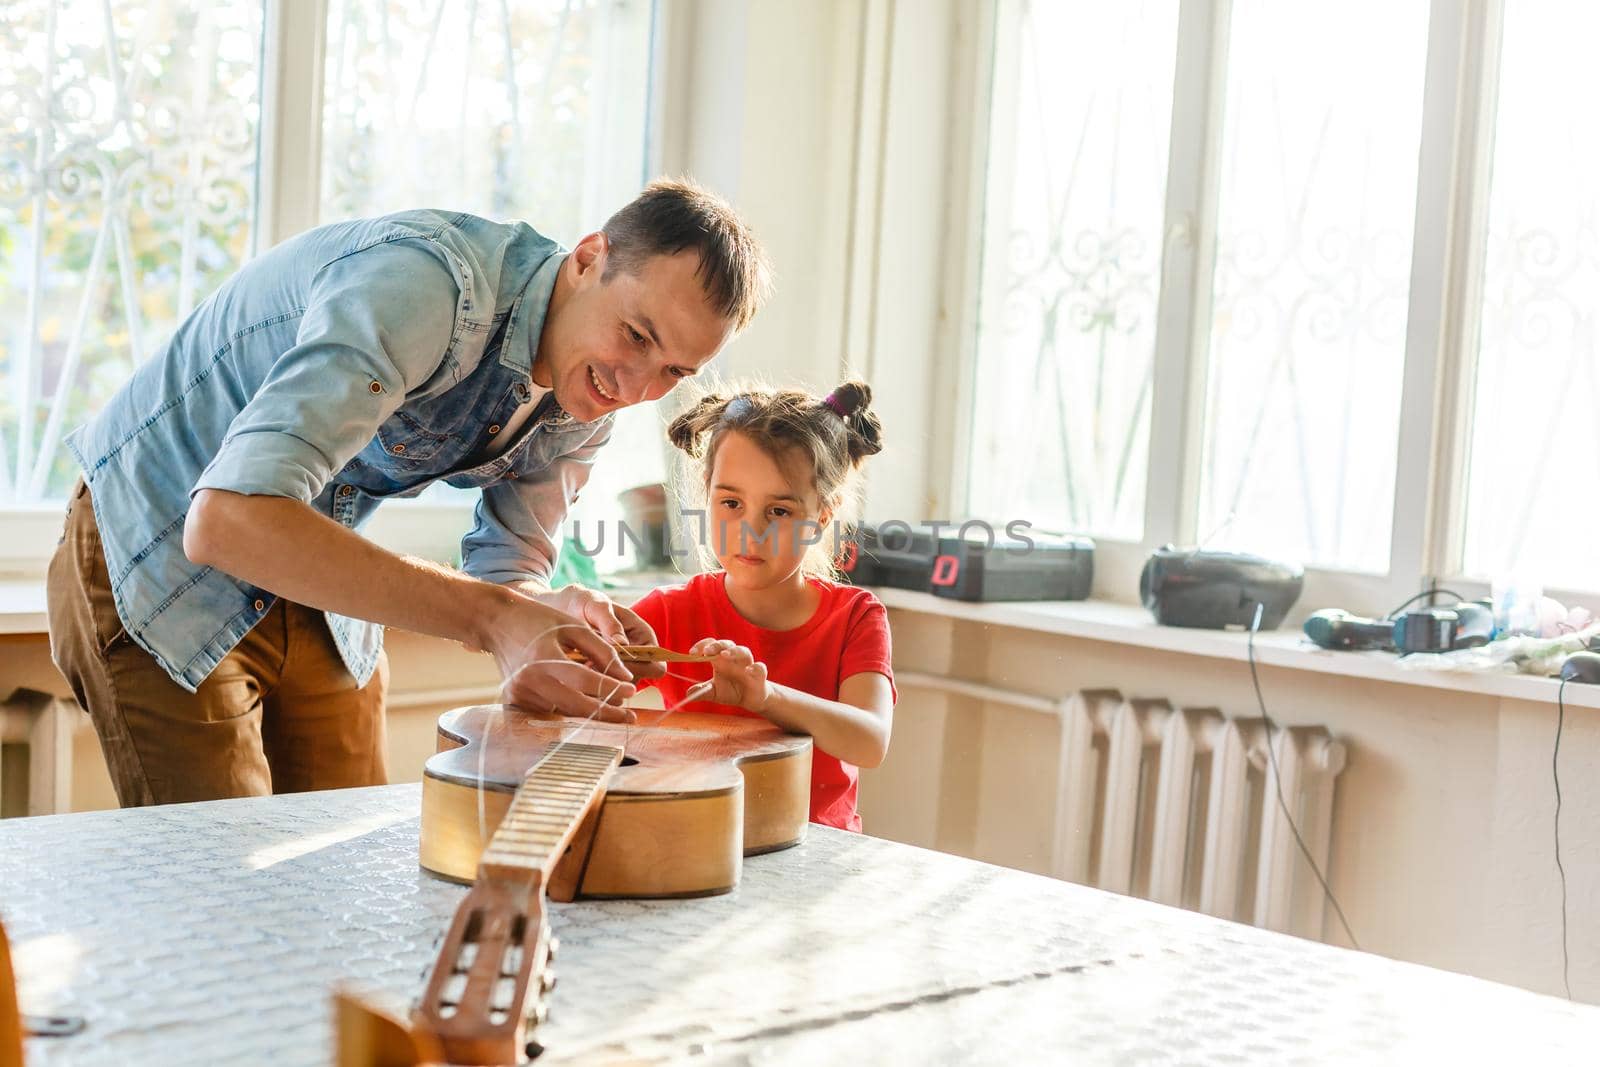 father and daughter repairing a guitar